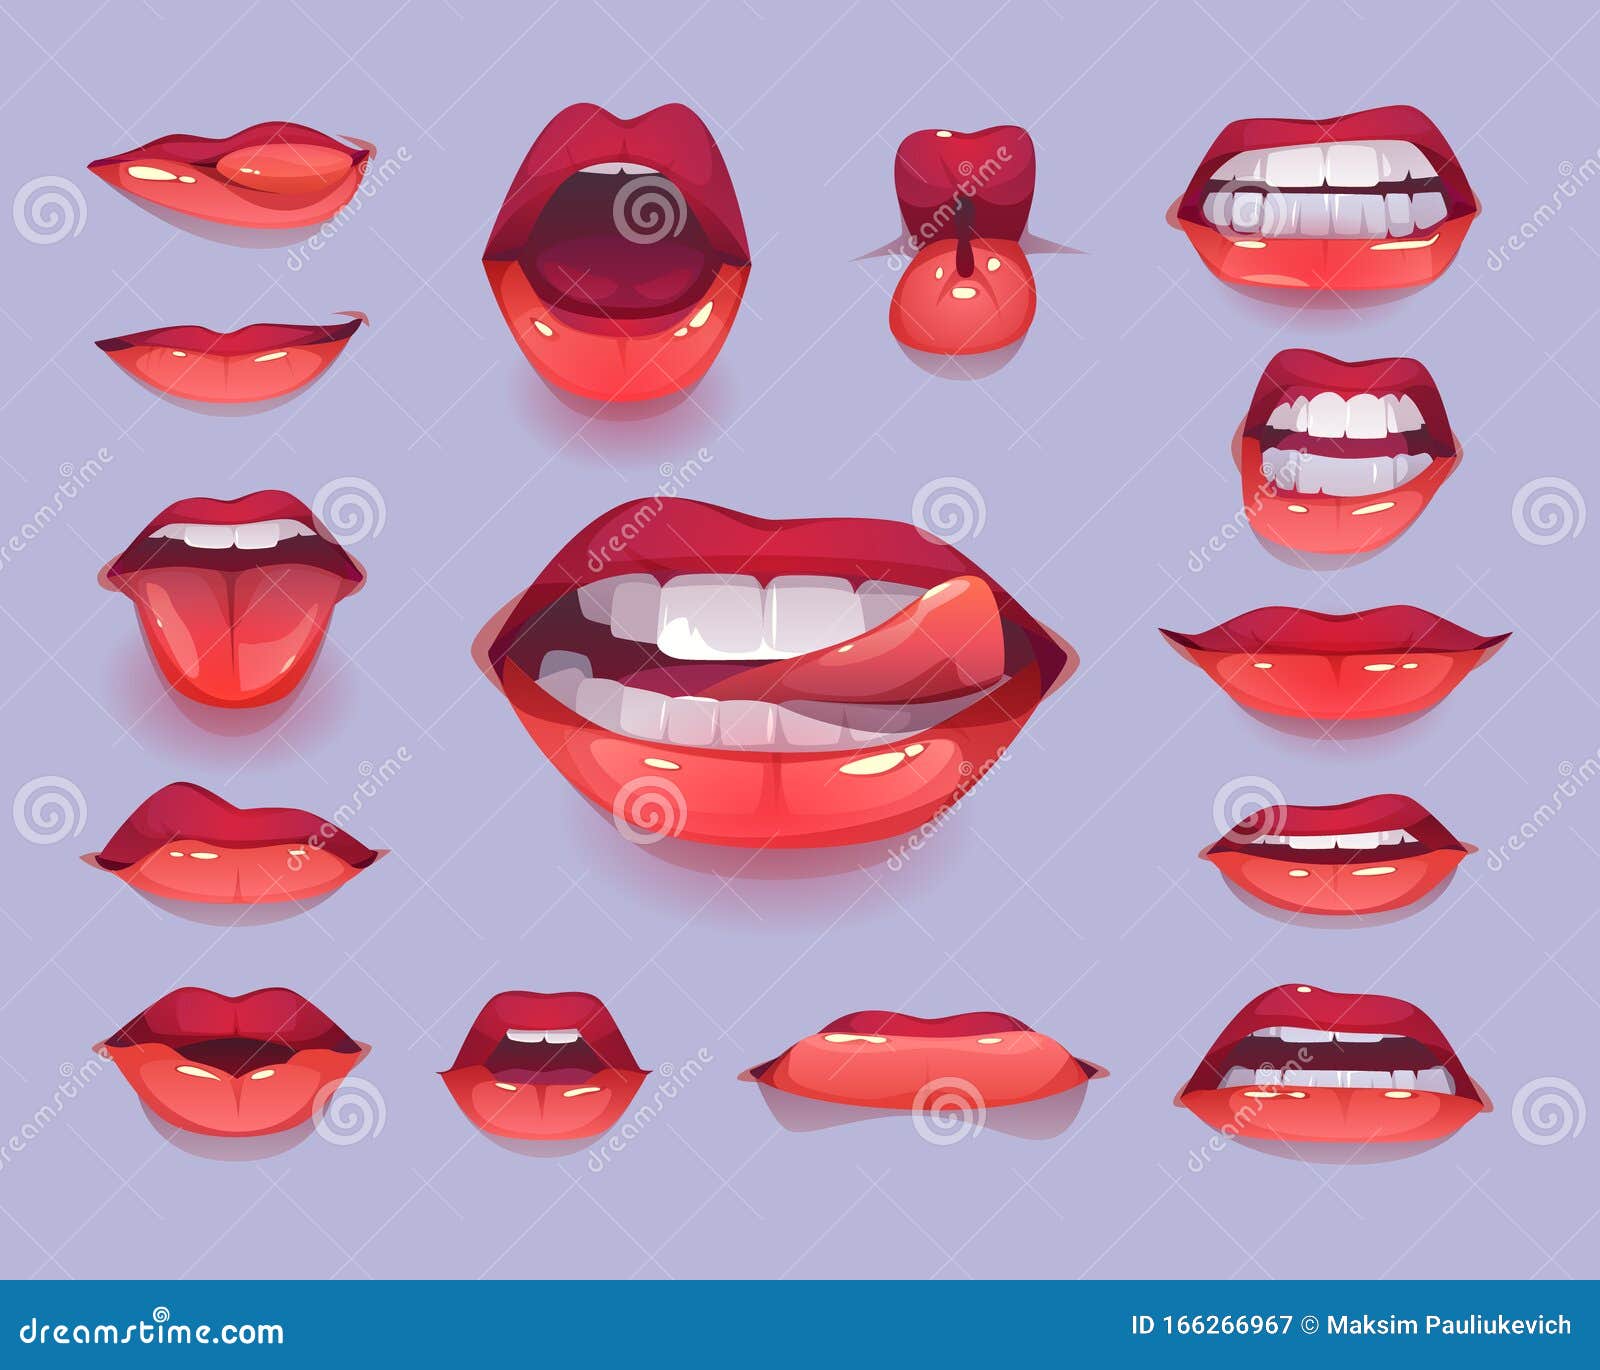 woman mouth set. red sexy lips expressing emotions